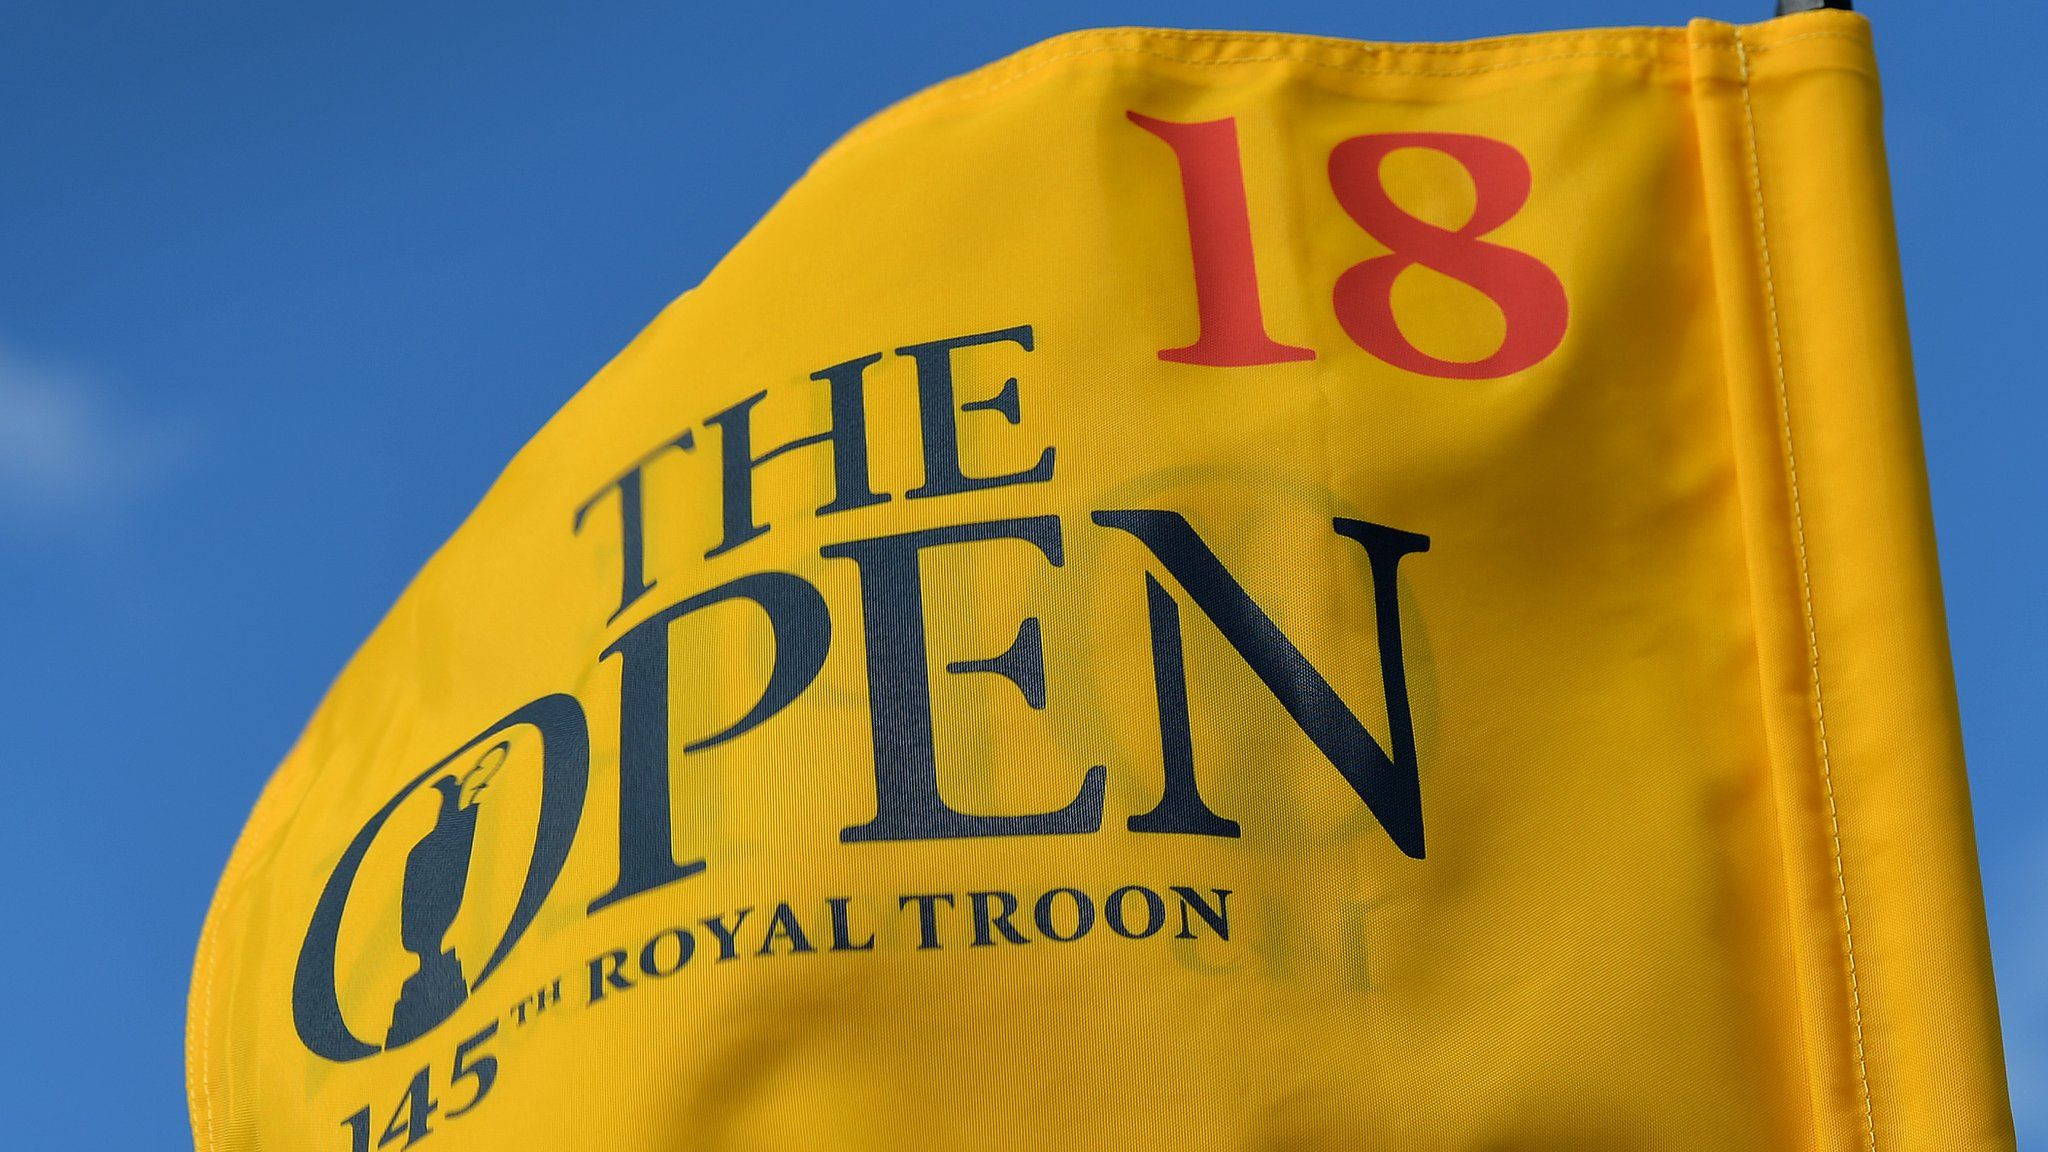 The 2016 Open 18th hole flag